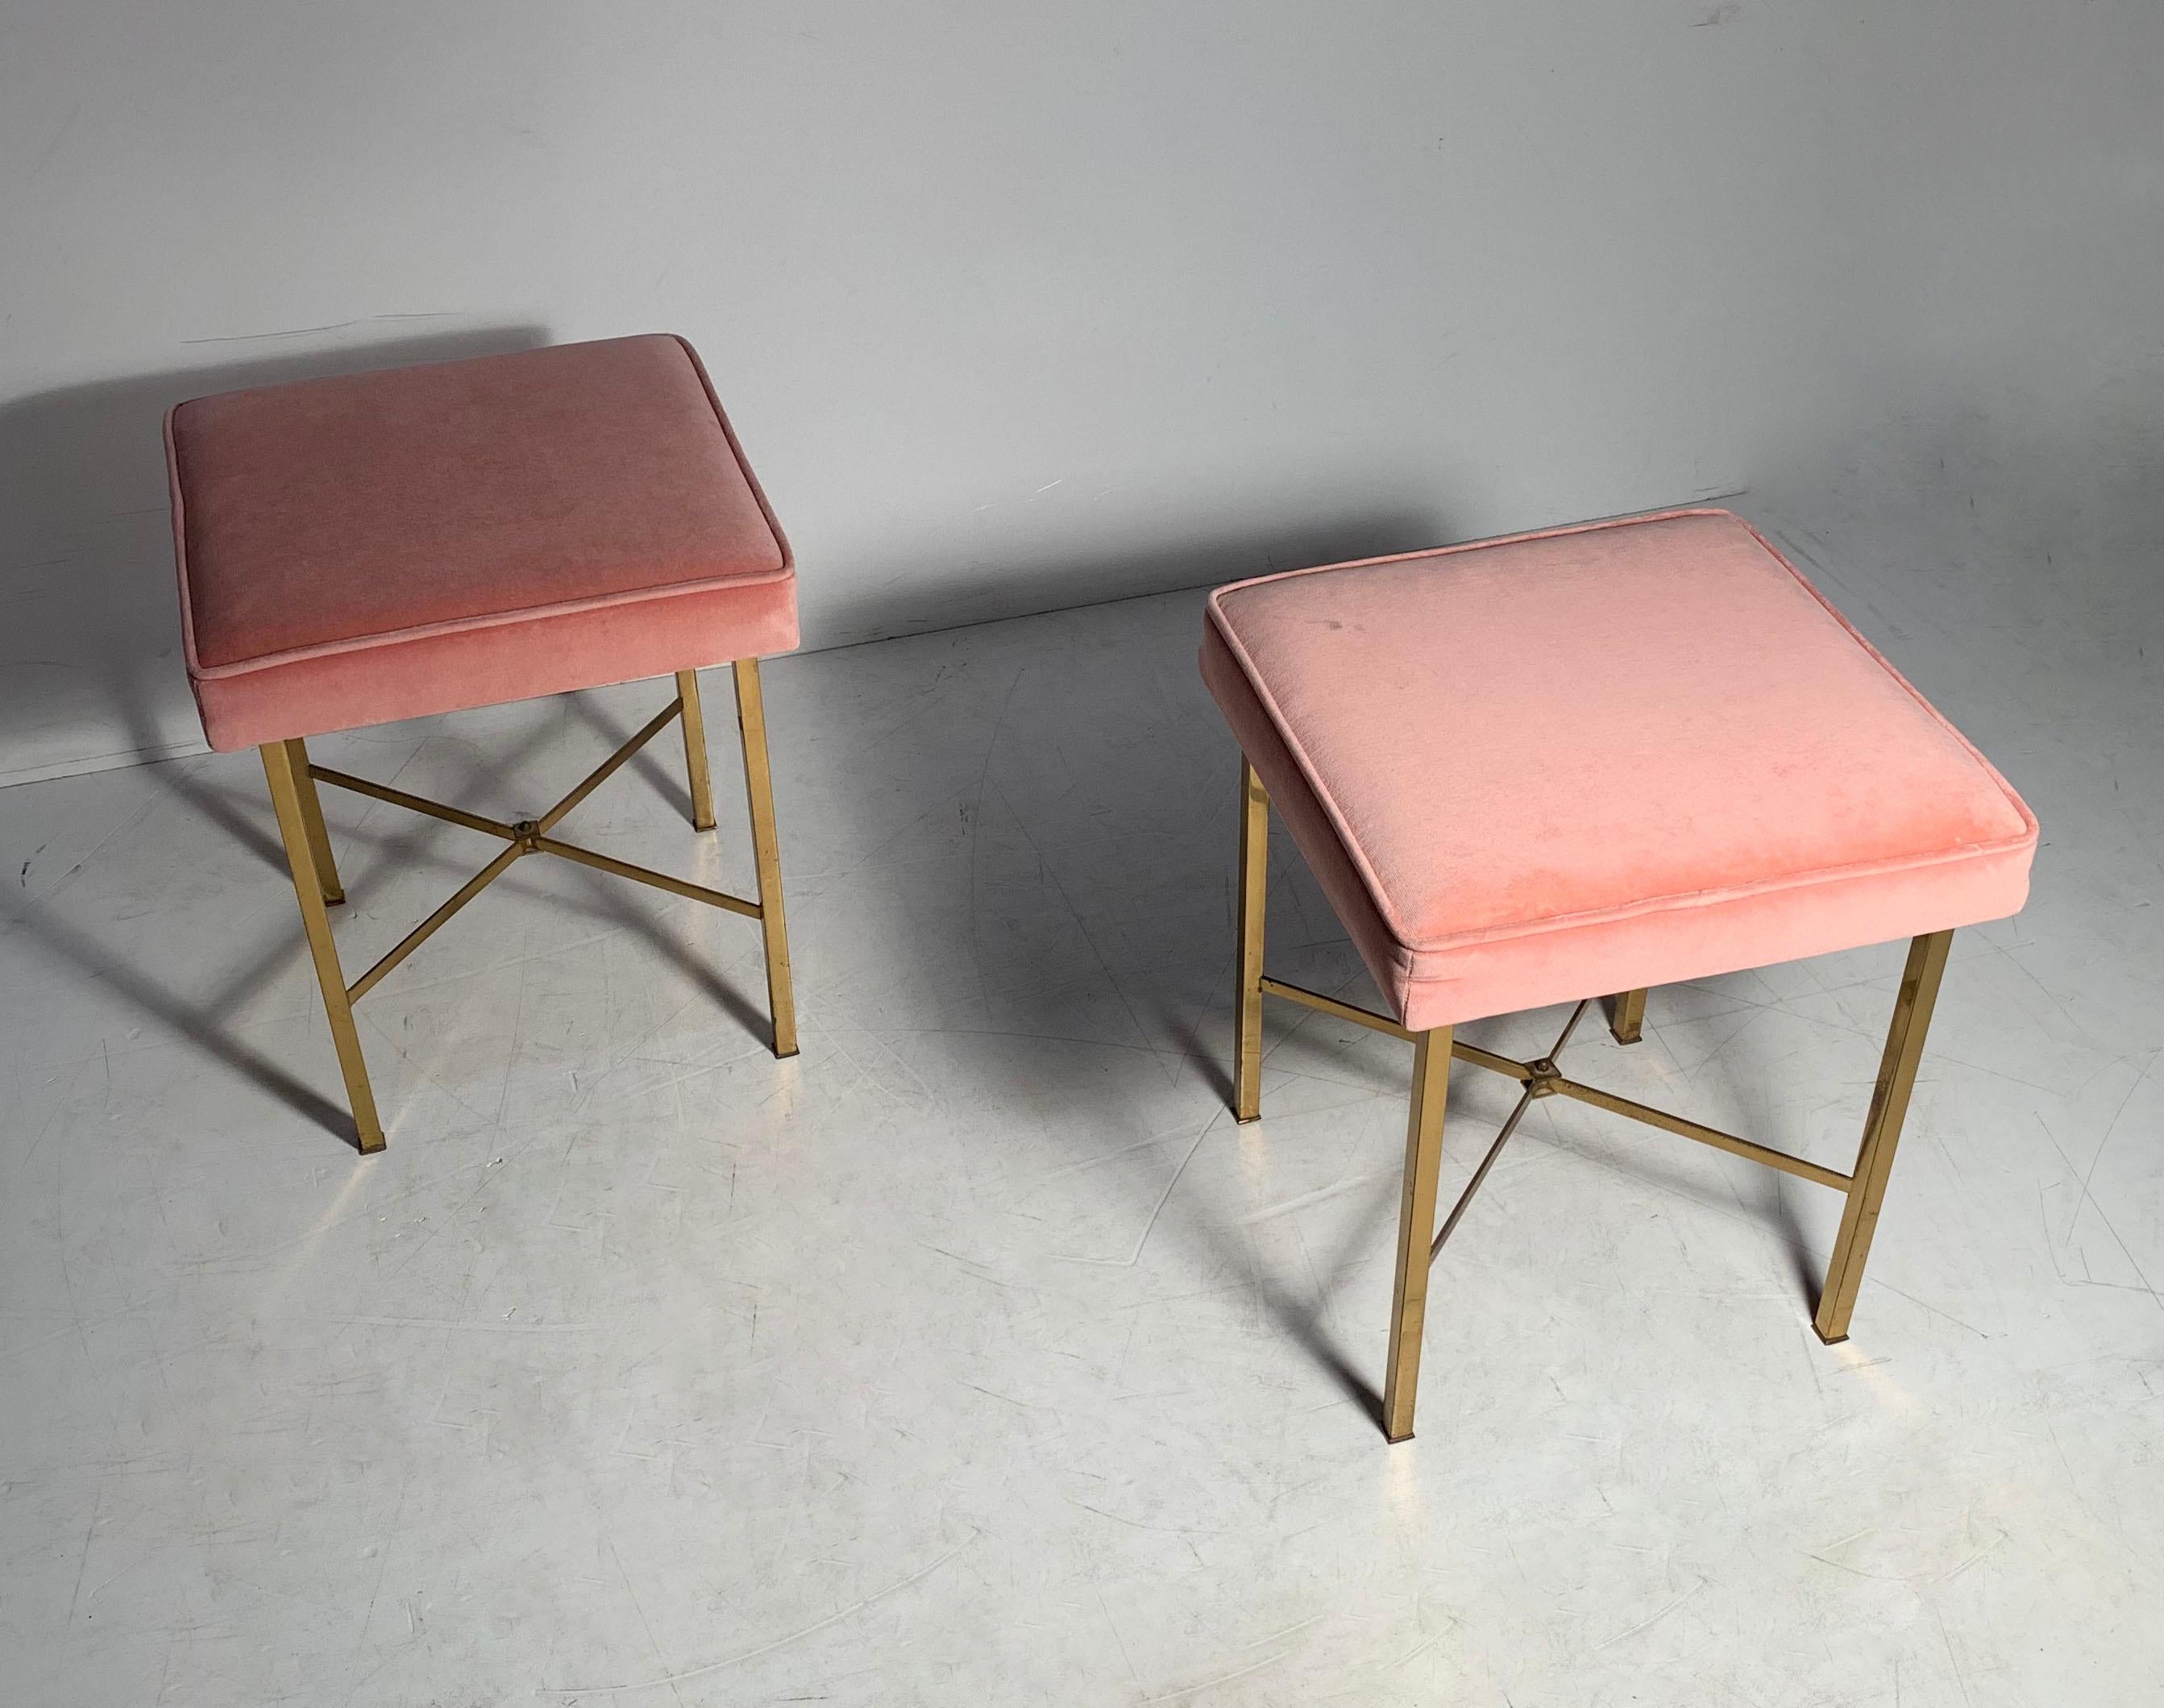 Pair of Mid-Century Modern Stools in the Manner of Paul McCobb 2